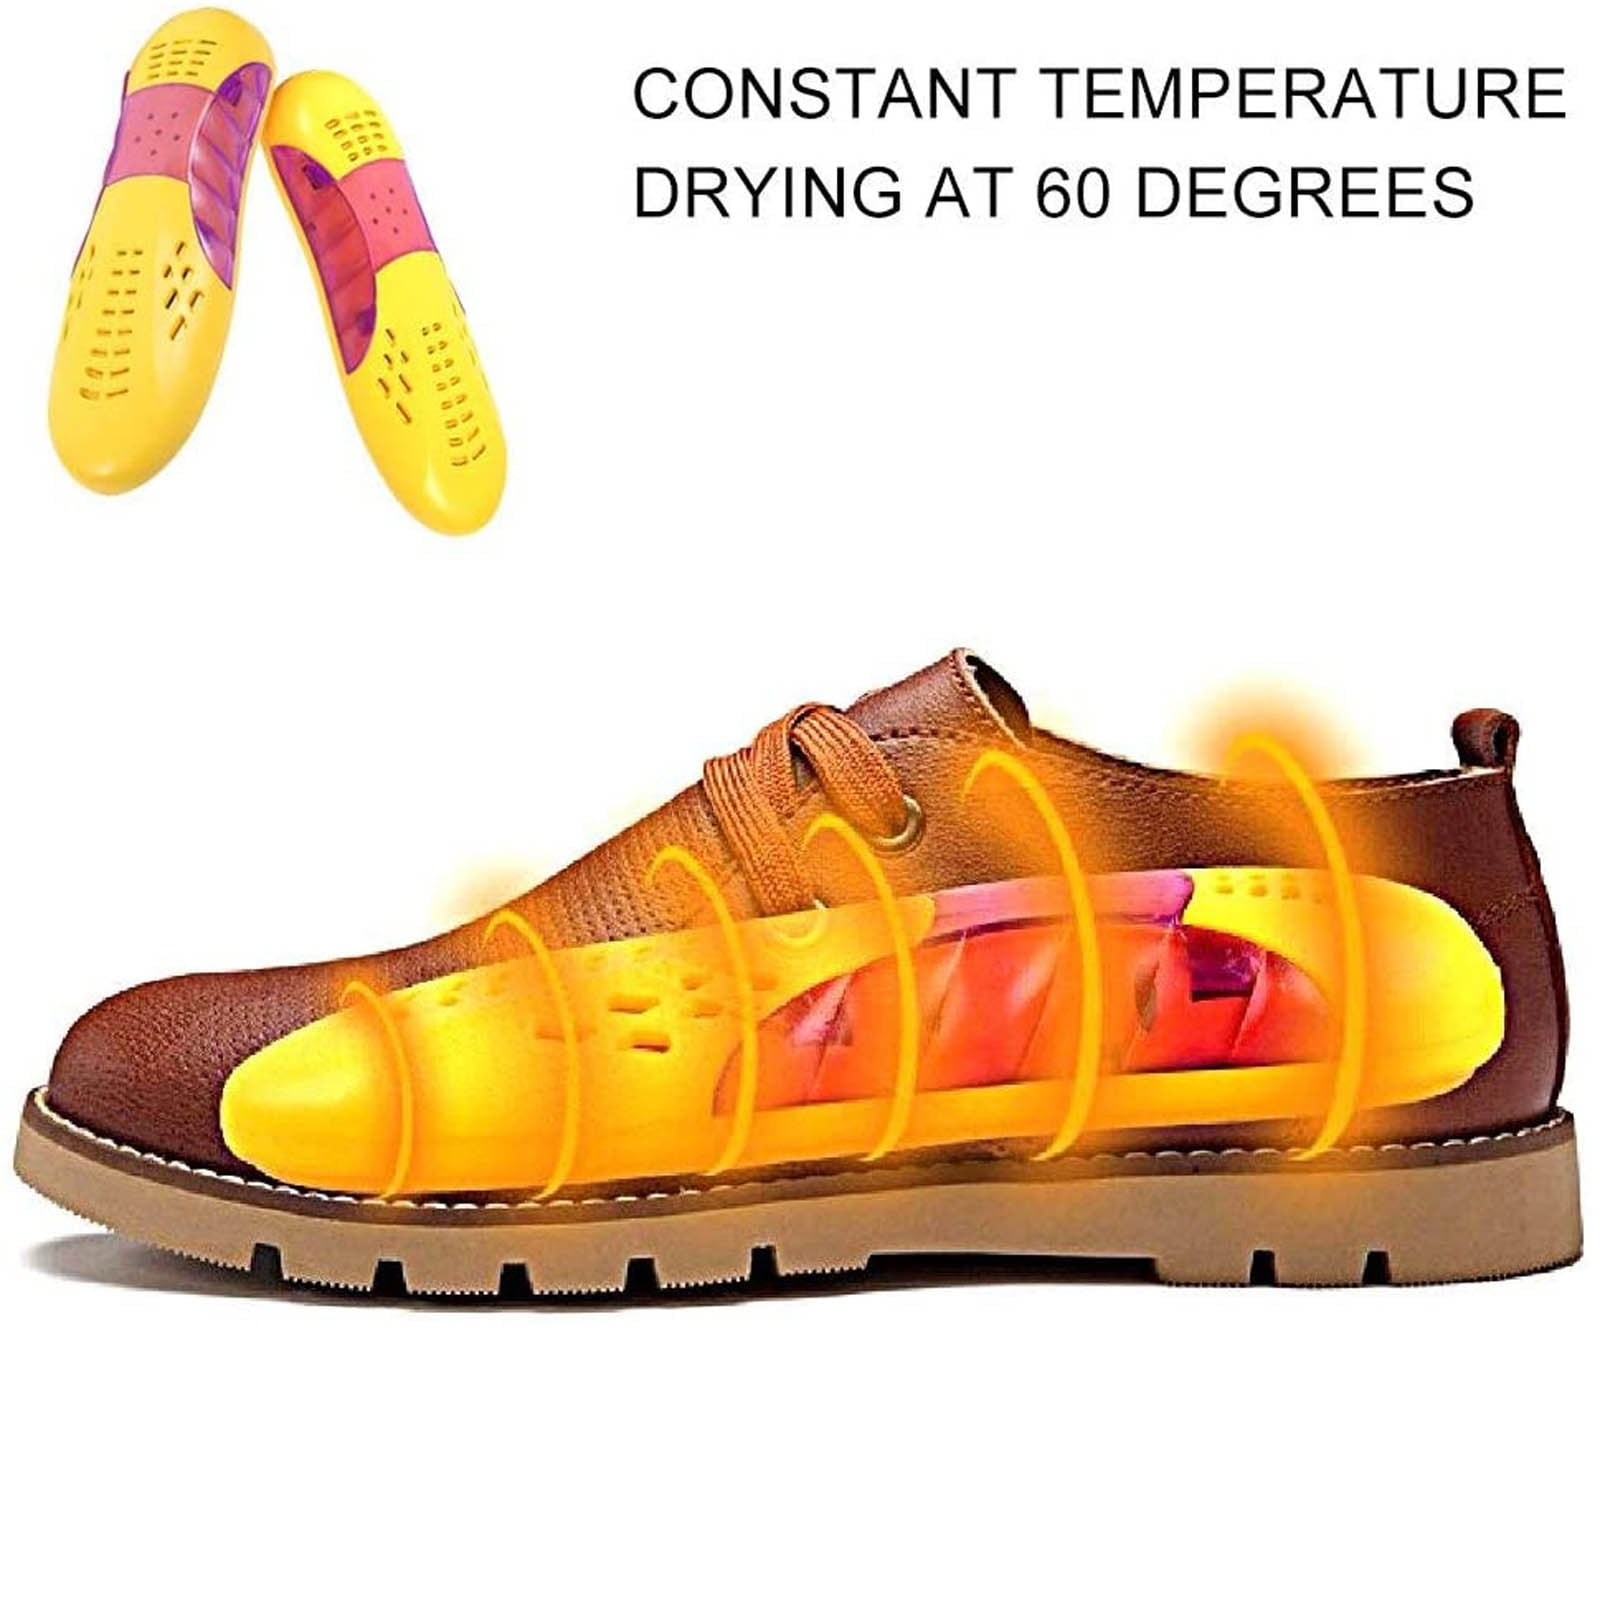 New Electric Shoes Dryer Warmer Deodorant Heating Dry Footwear with fan yellow 